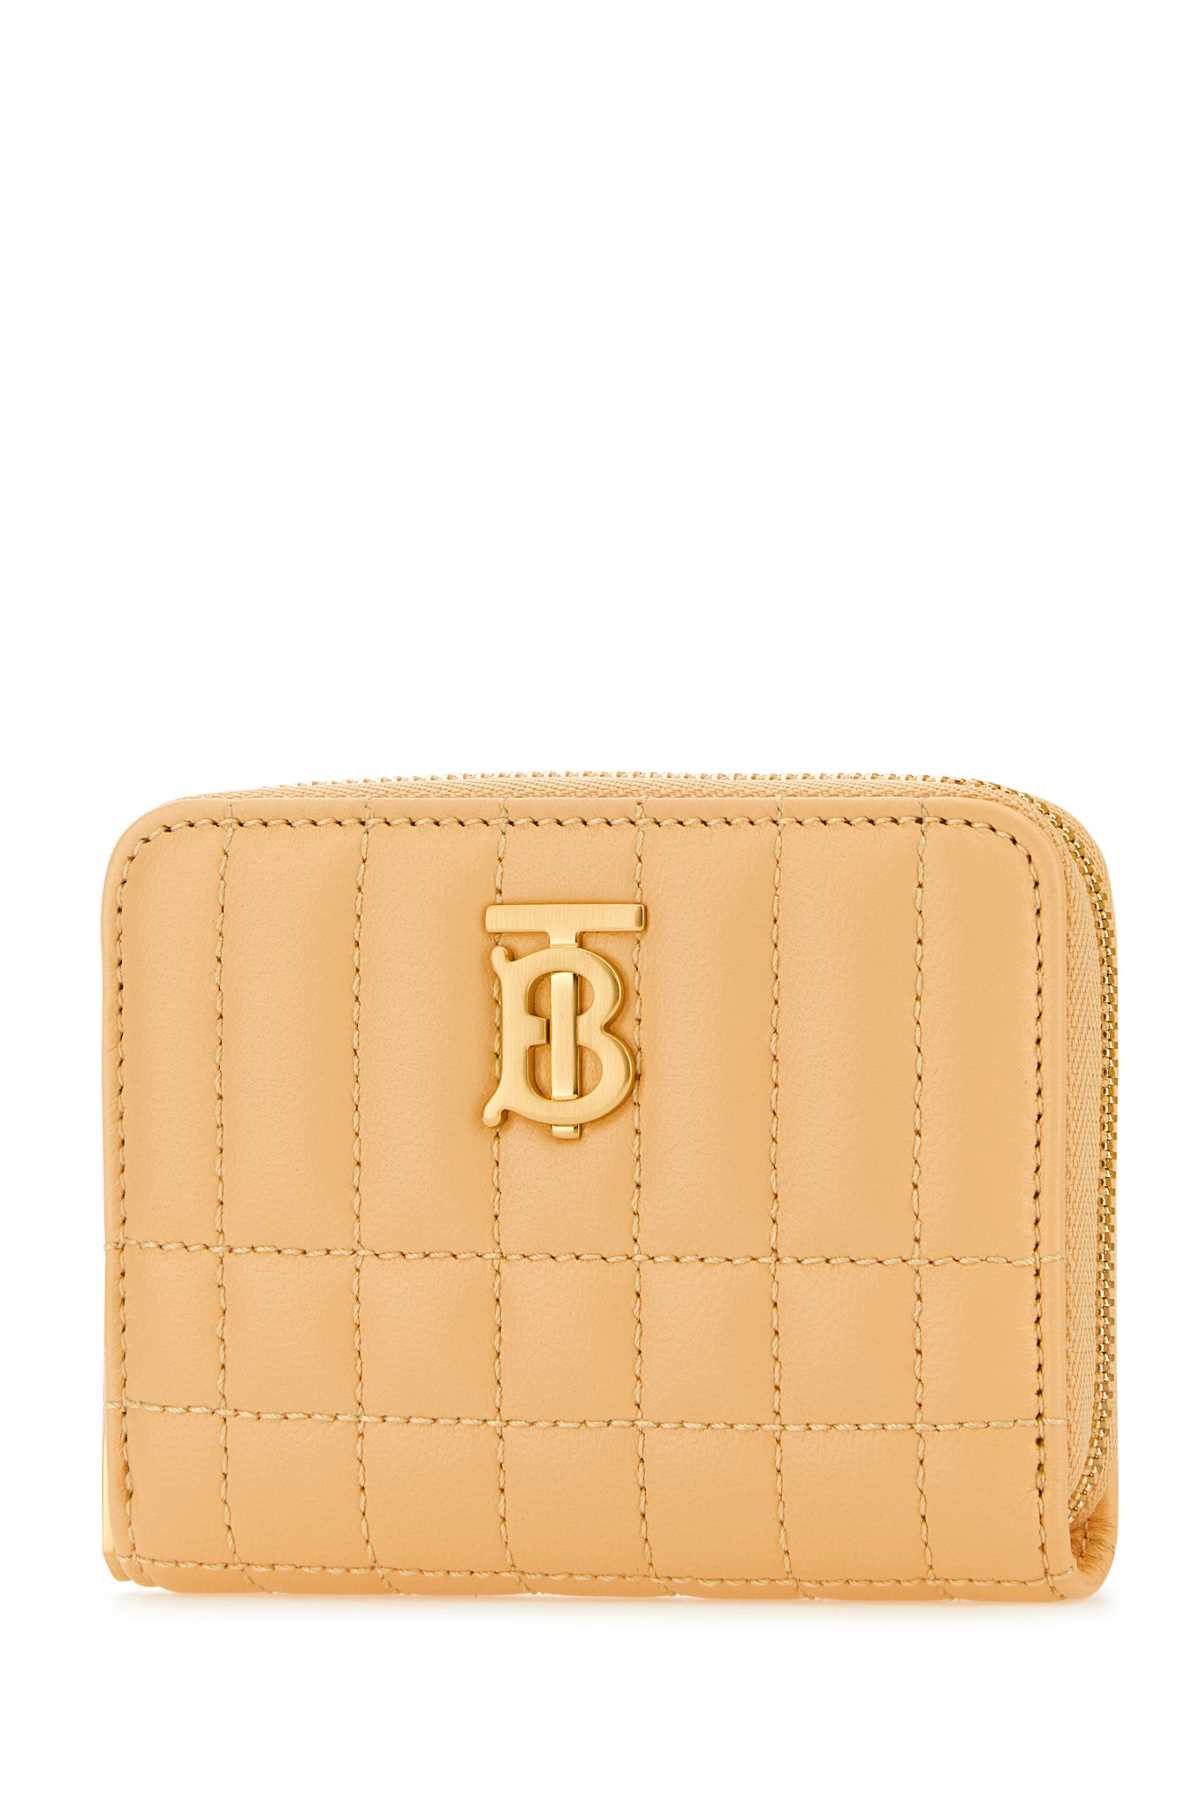 BURBERRY PEACH NAPPA LEATHER WALLET